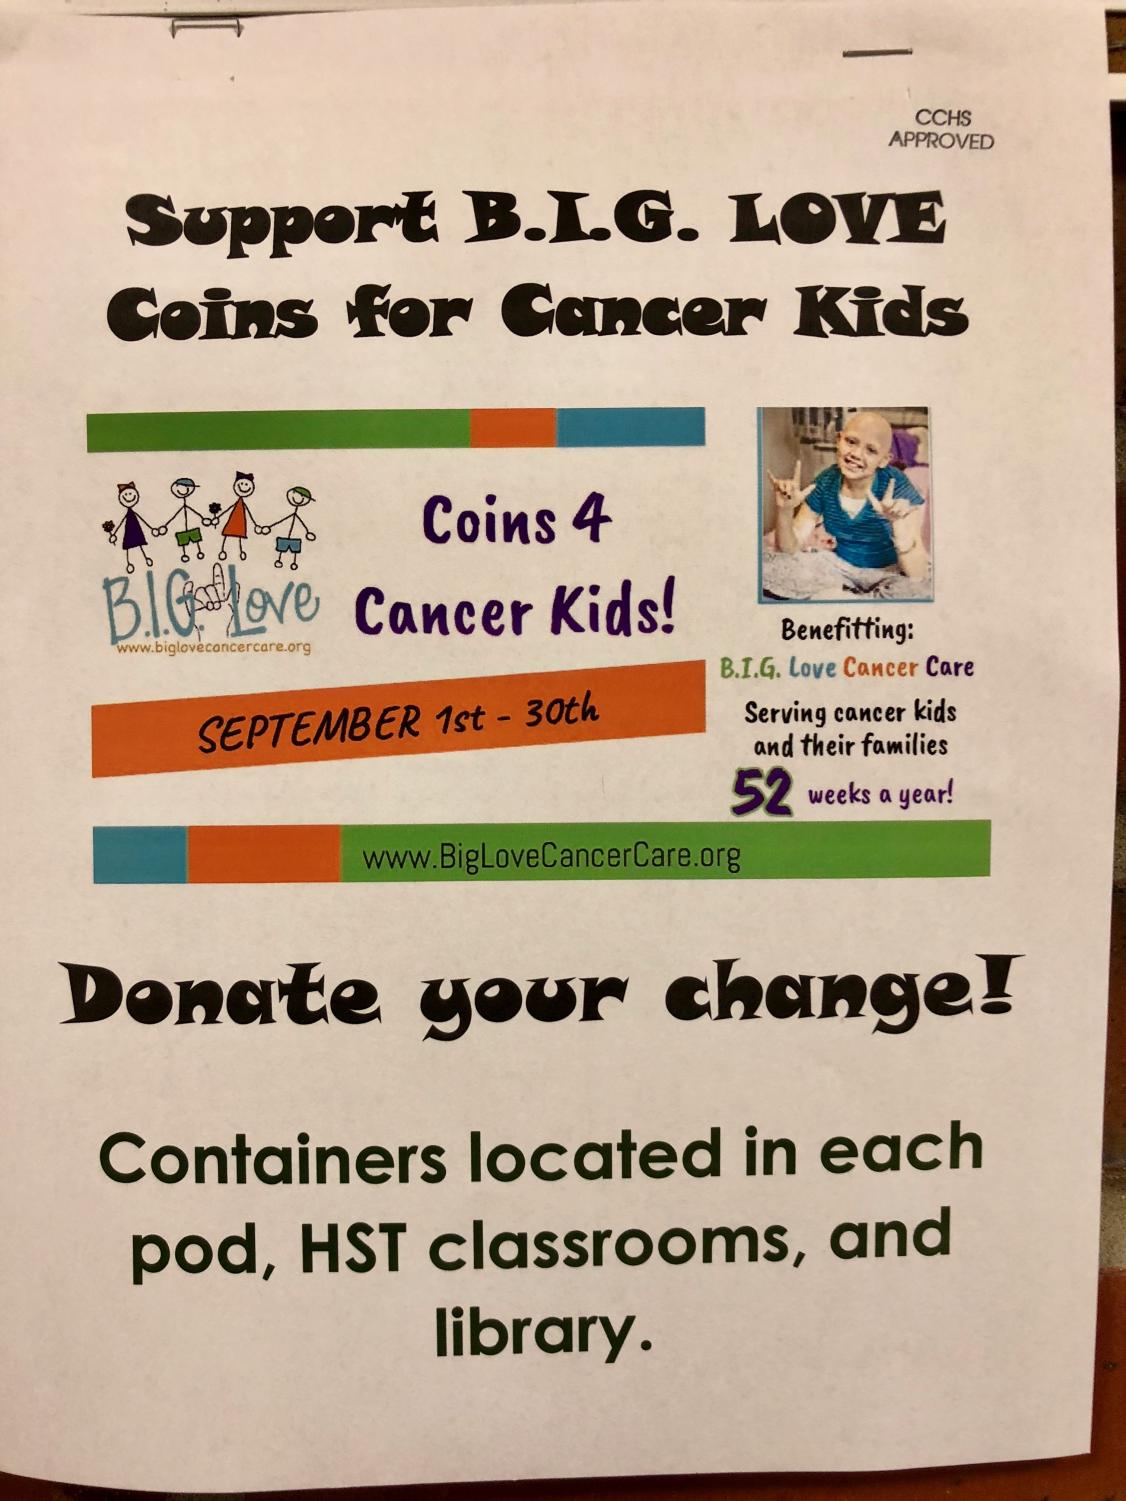 Support BIG LOVE Coins for Cancer Kids